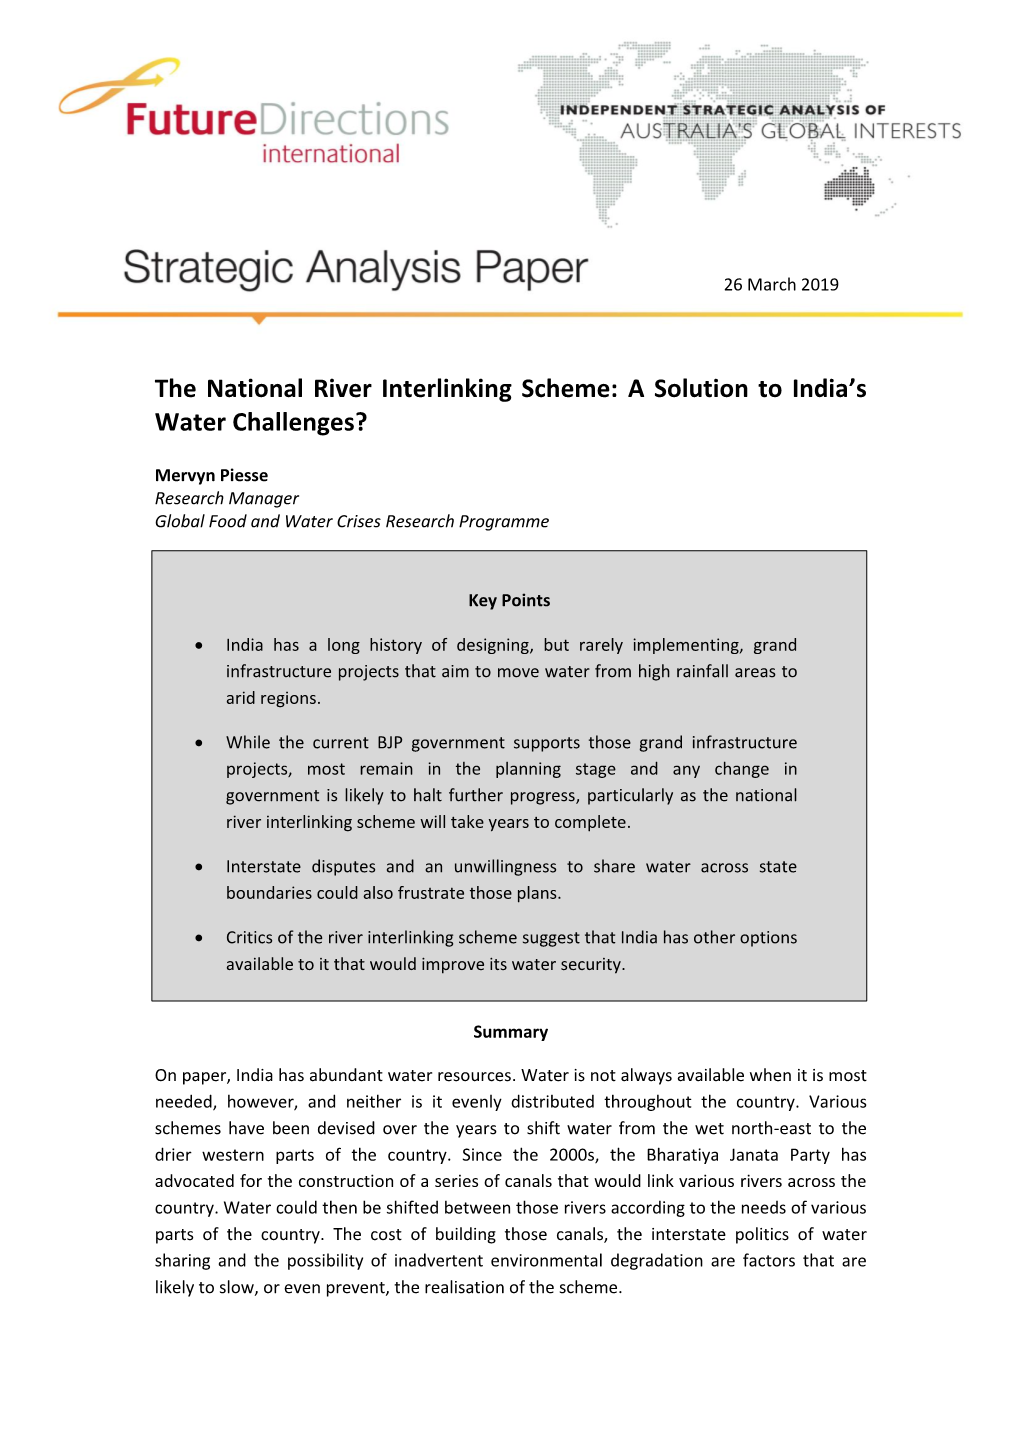 The National River Interlinking Scheme: a Solution to India’S Water Challenges?